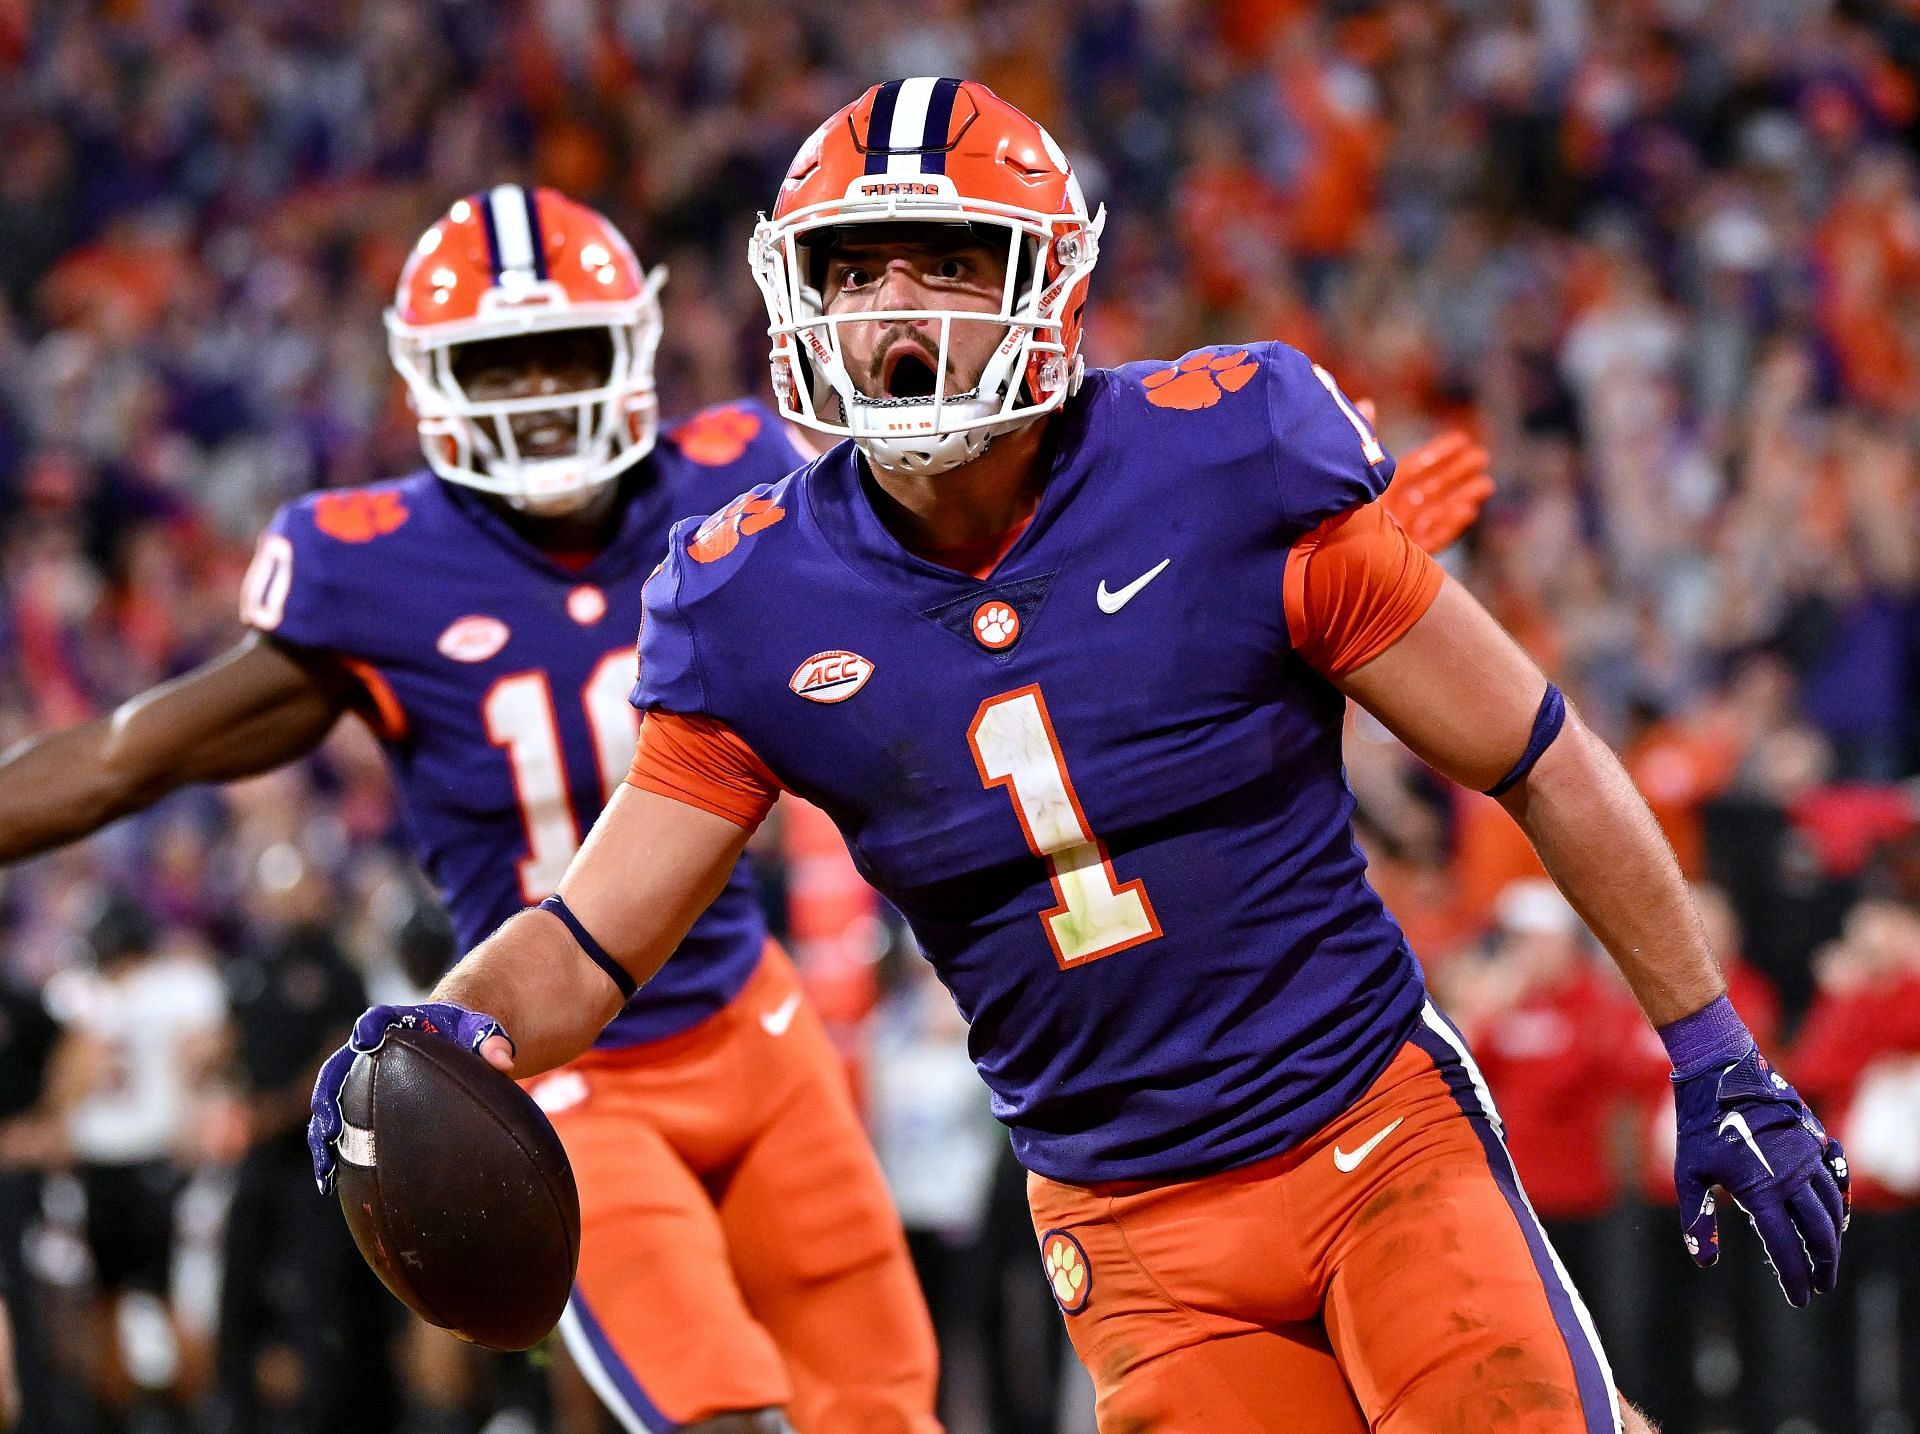 Will Shipley #1 of the Clemson Tigers reacts after scoring a touchdown against the Louisville Cardinals